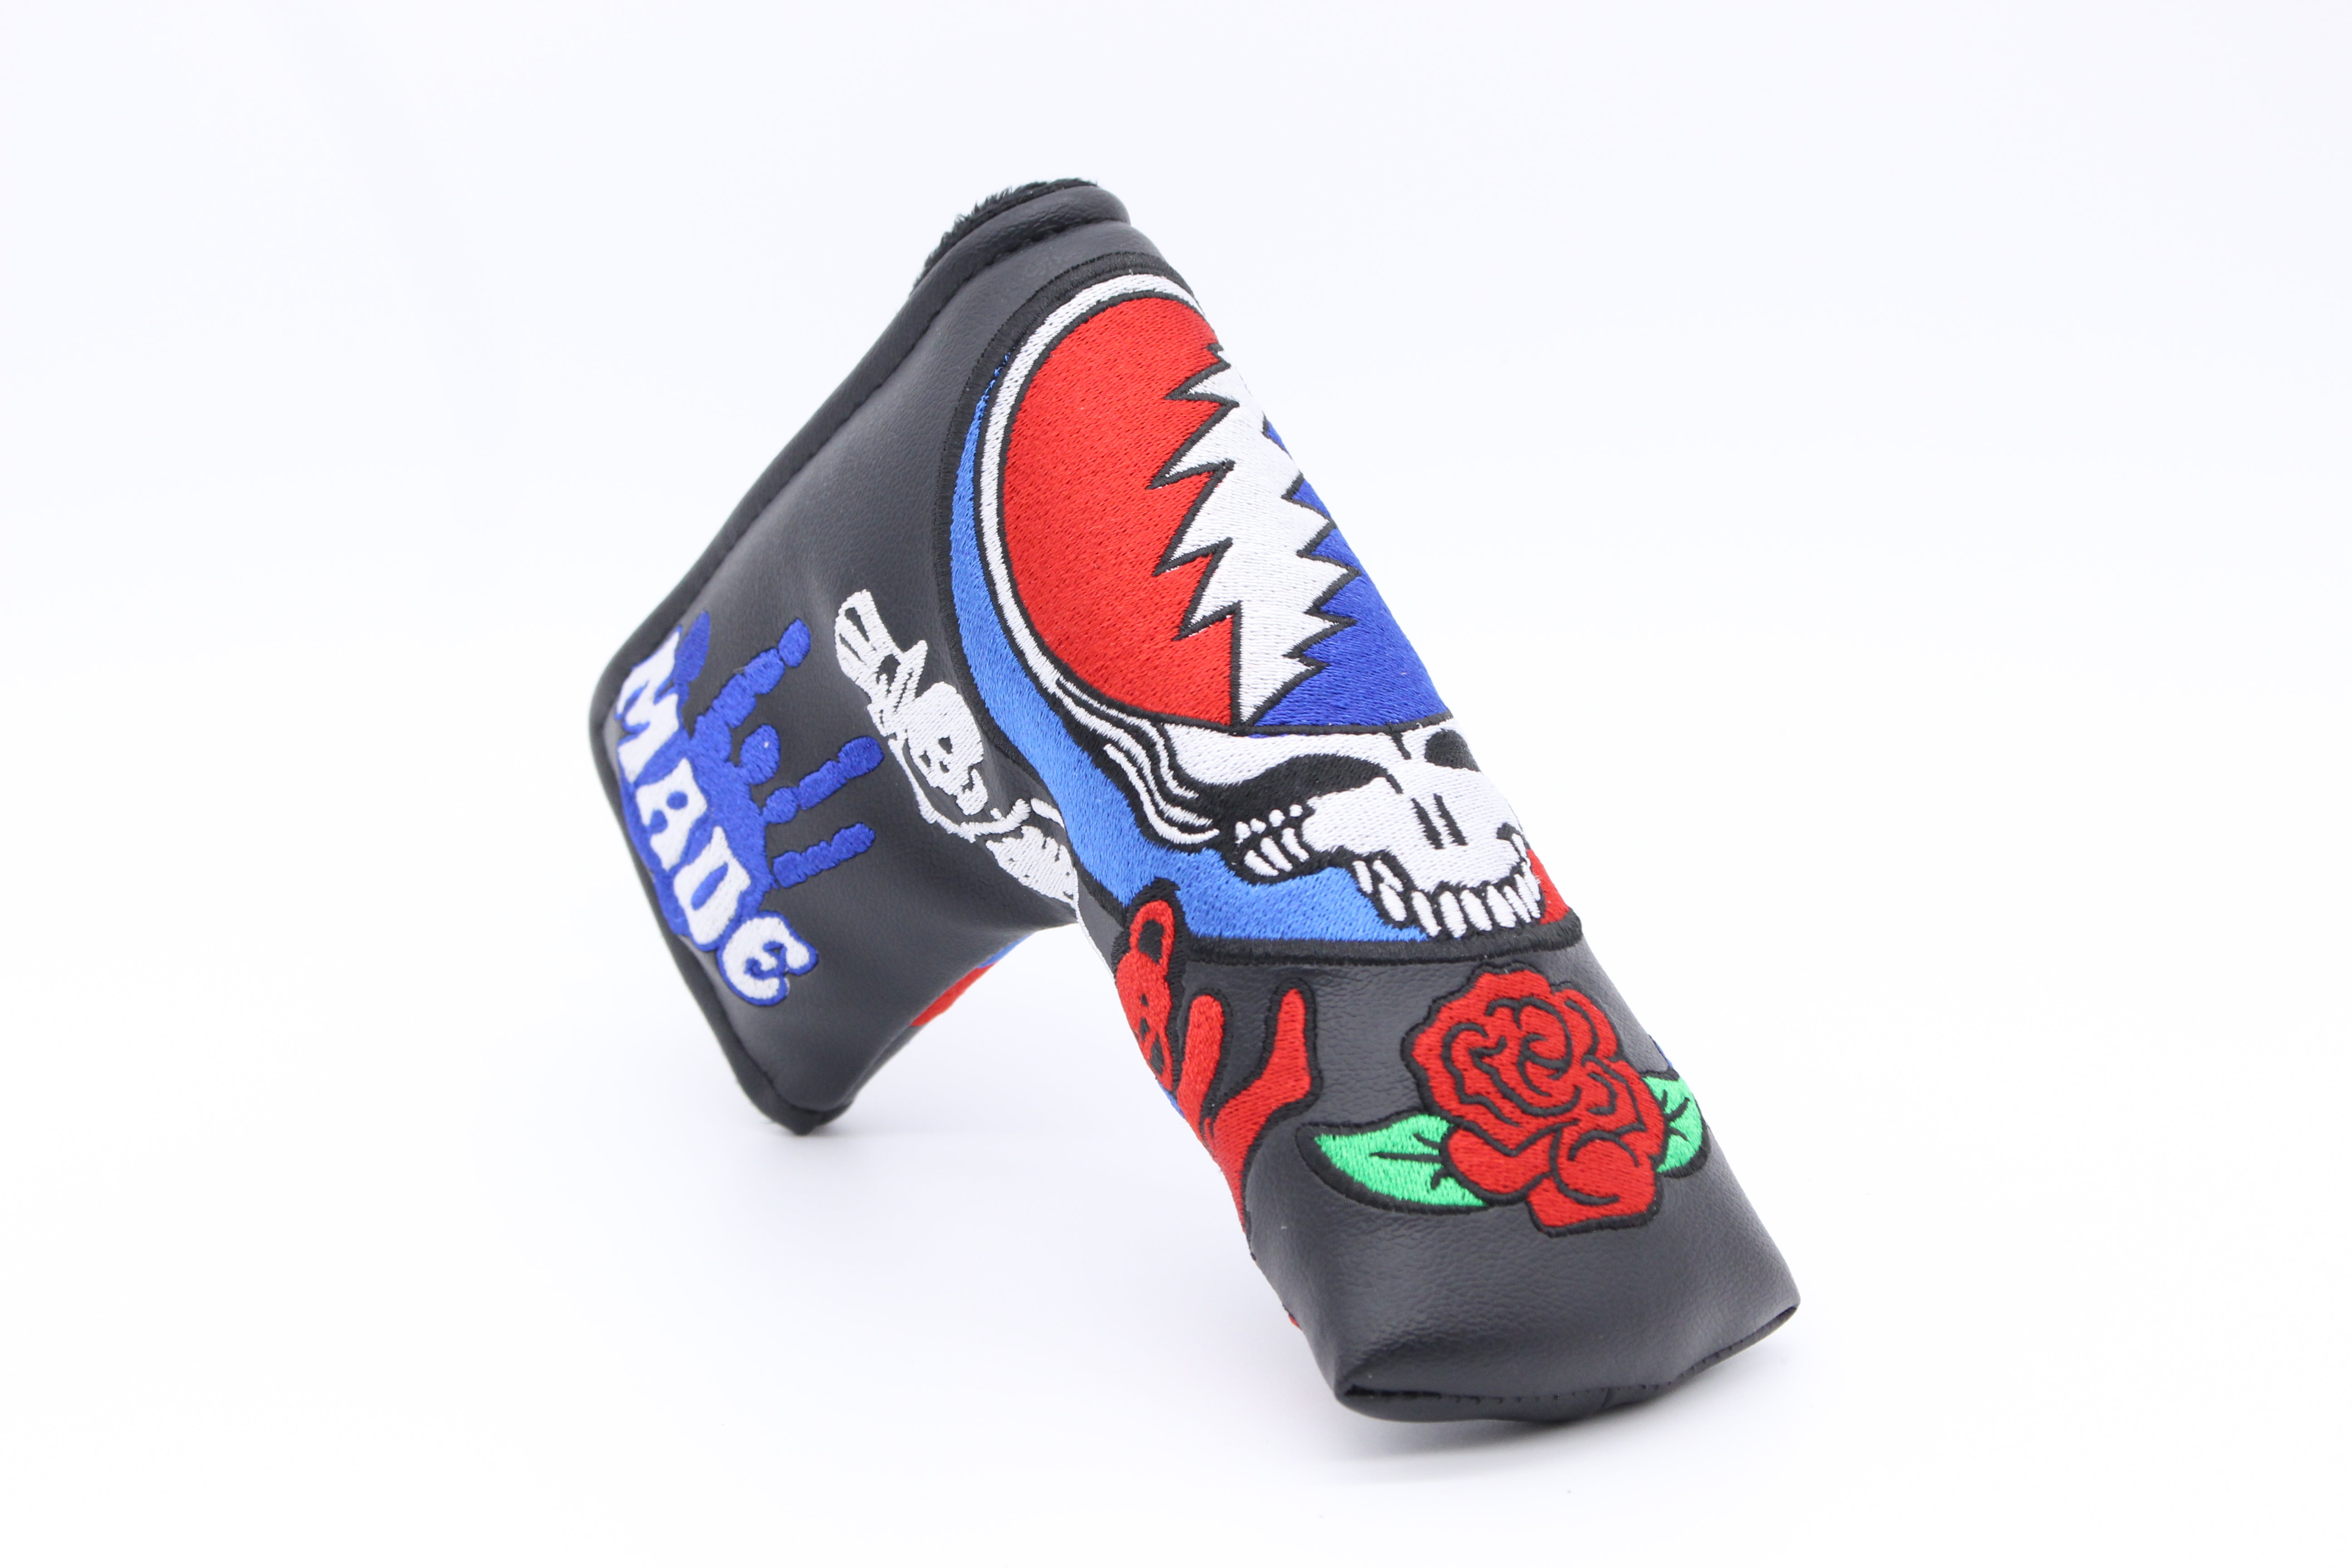 Dead Inspired - Leather Grateful Roses Golf Mallet Putter Head Cover - FREE  U.S. SHIPPING! - Phunky Threads